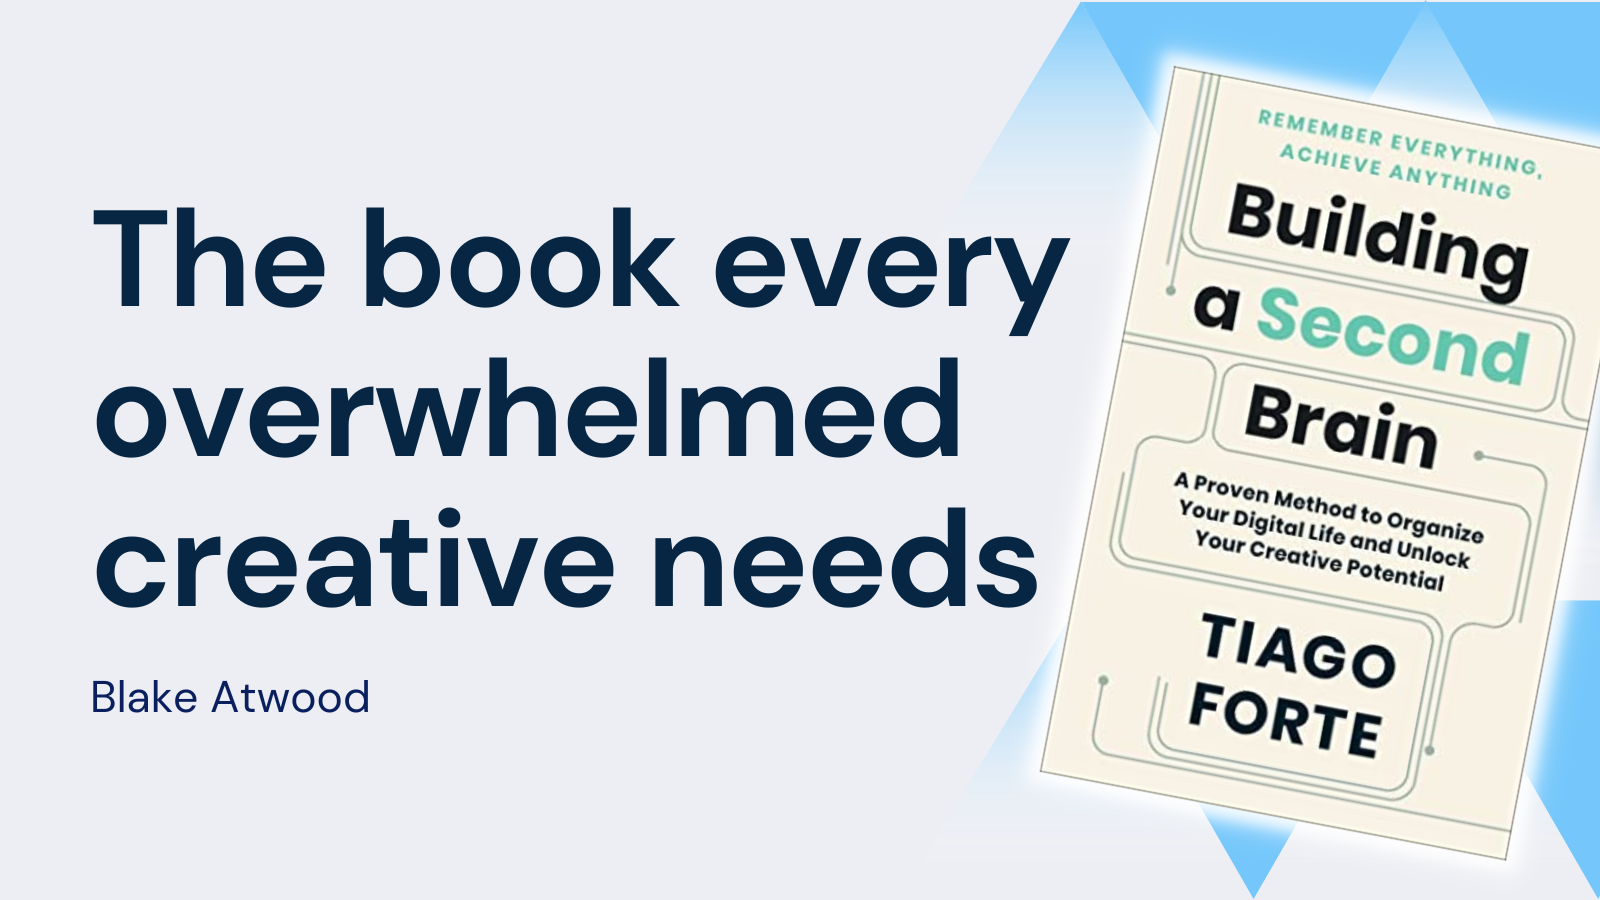 The book every overwhelmed creative needs: Building a Second Brain by Tiago Forte